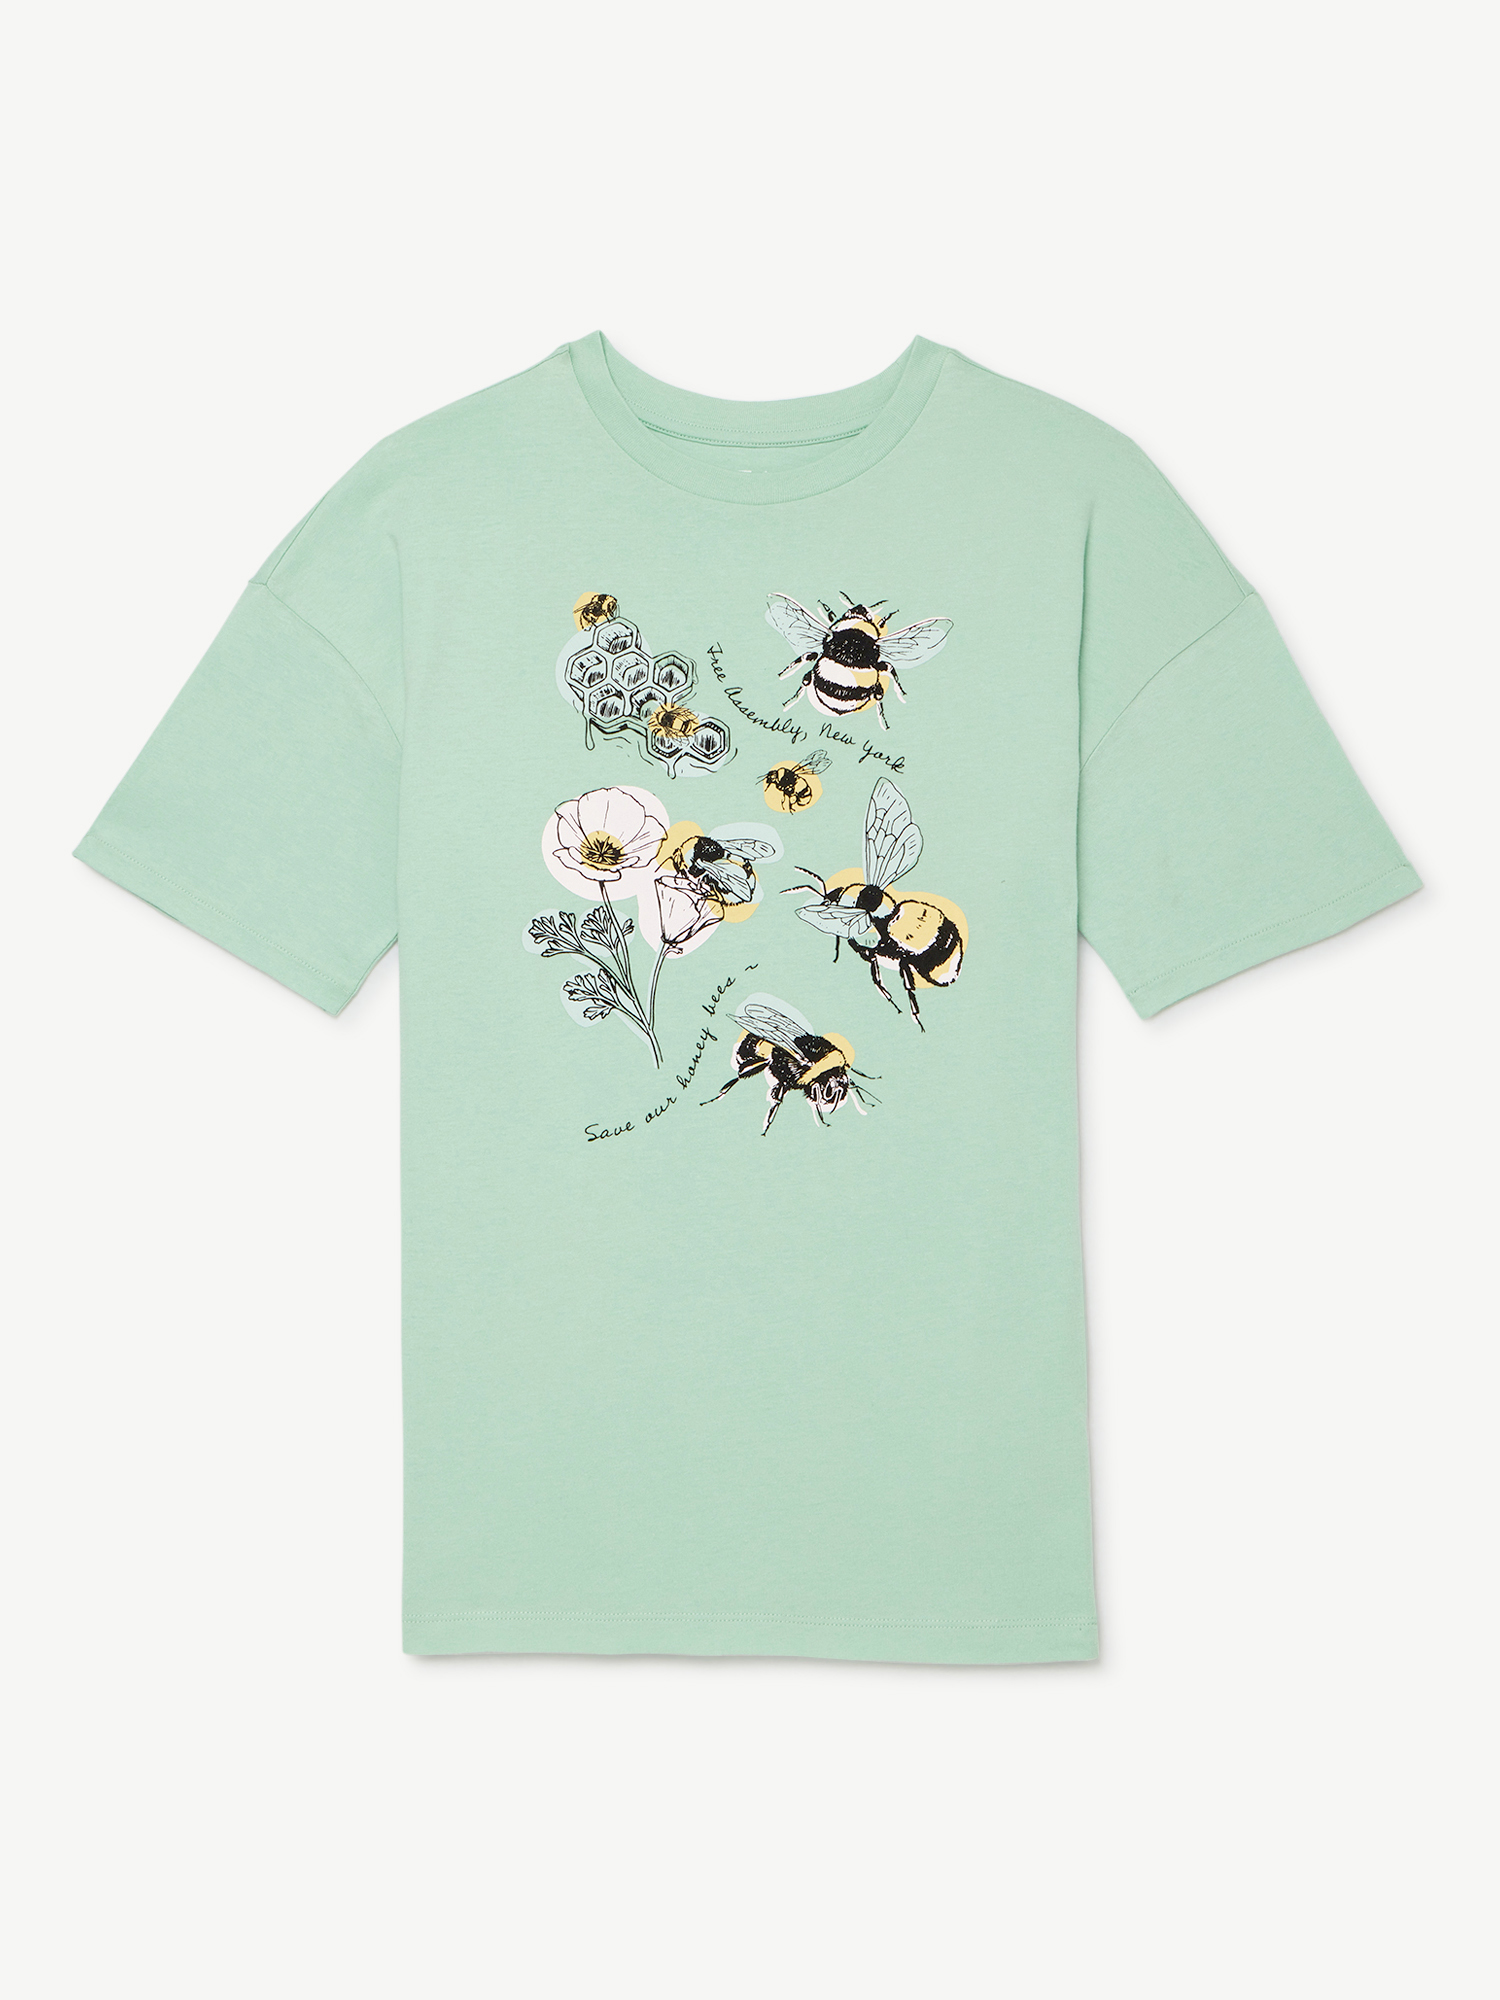 Free Assembly Girls Oversized Graphic Tee with Short Sleeves, Sizes 4-18 - image 5 of 5